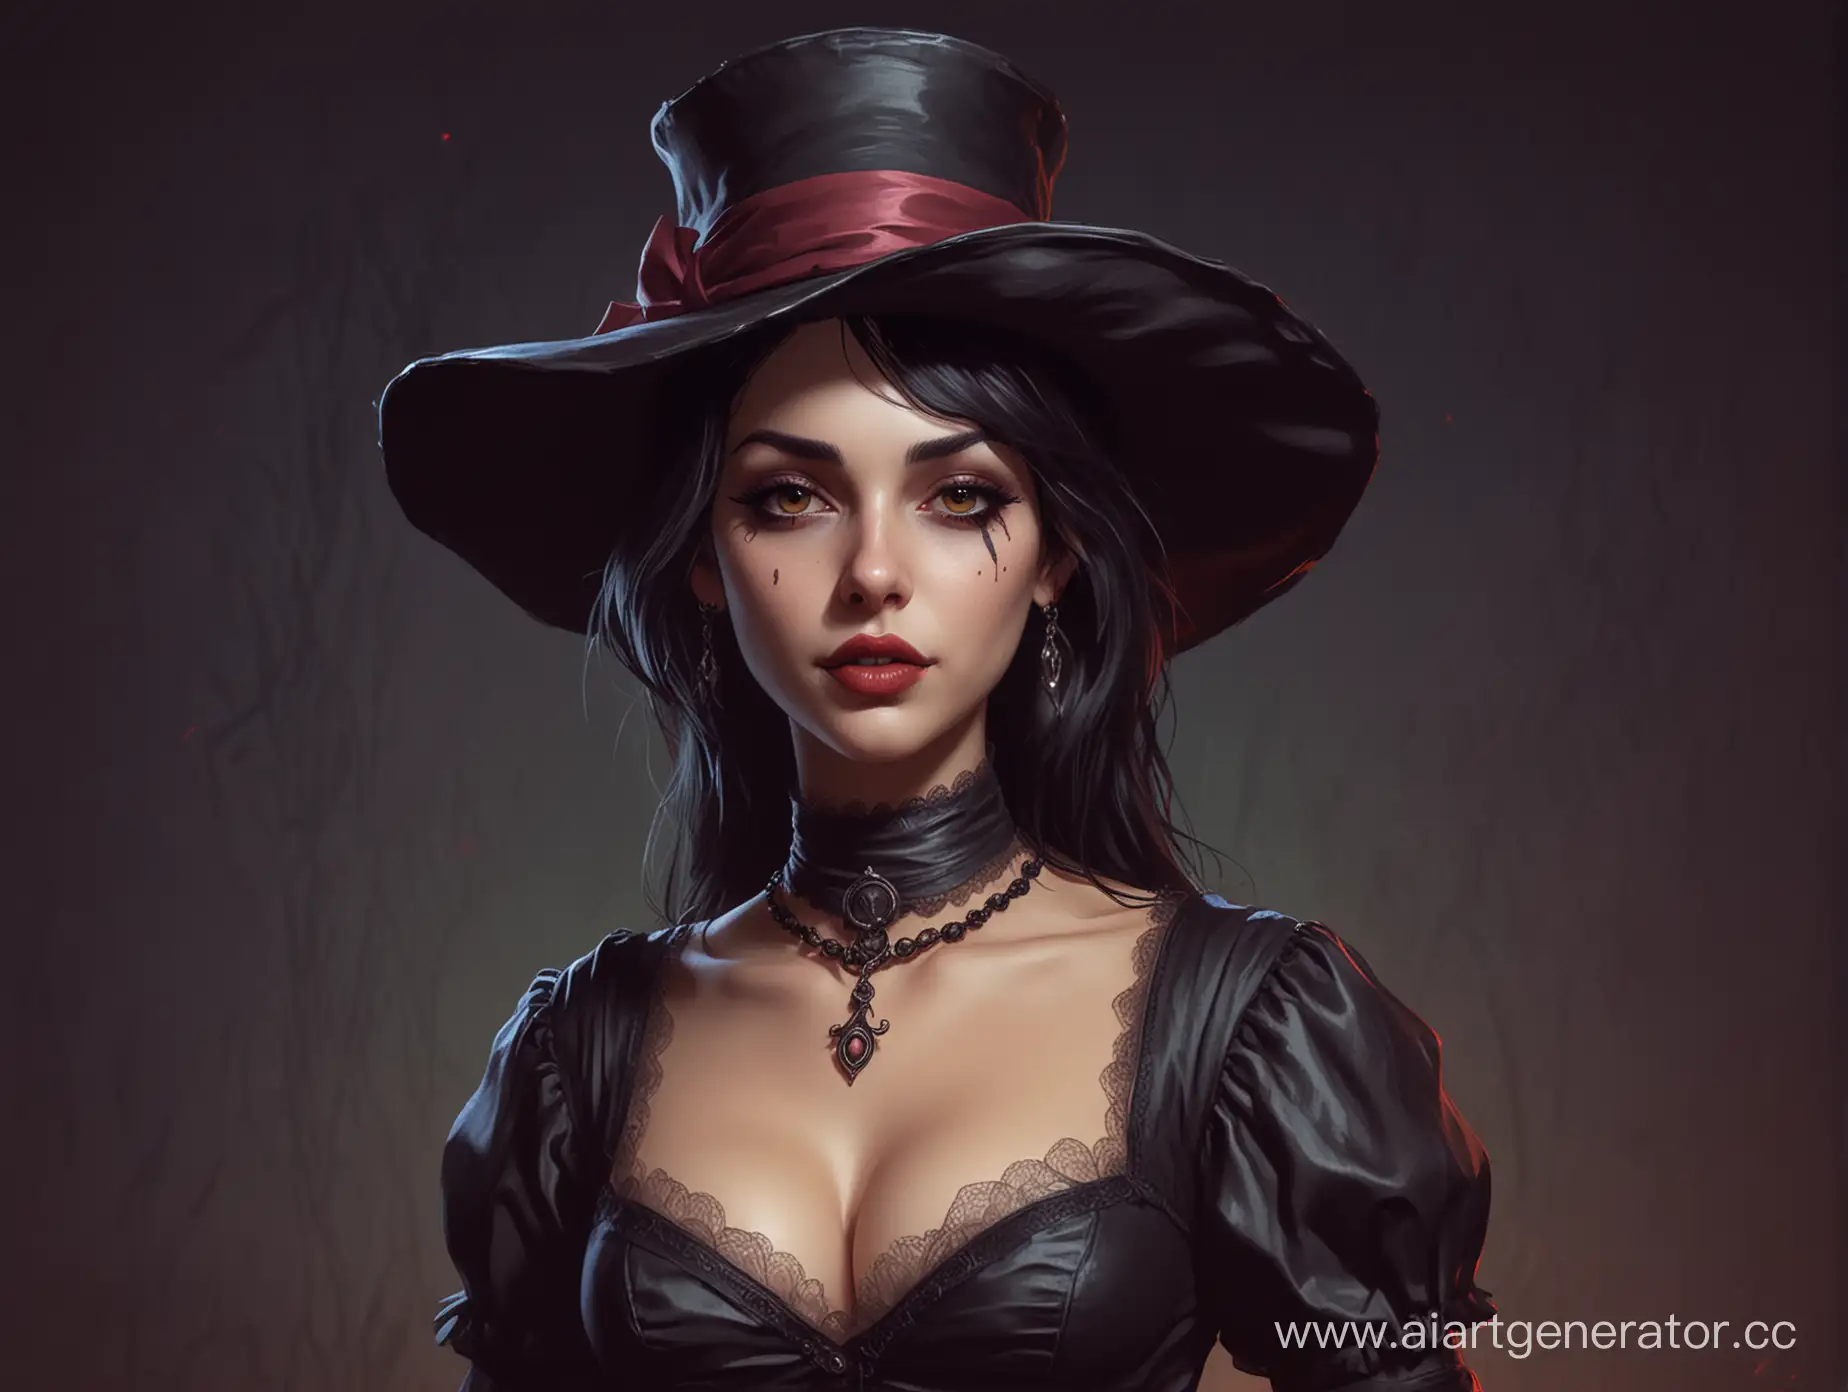 Mona-De-Lafitte-Iconic-Vampire-Character-Portrait-from-A-Vampyre-Story